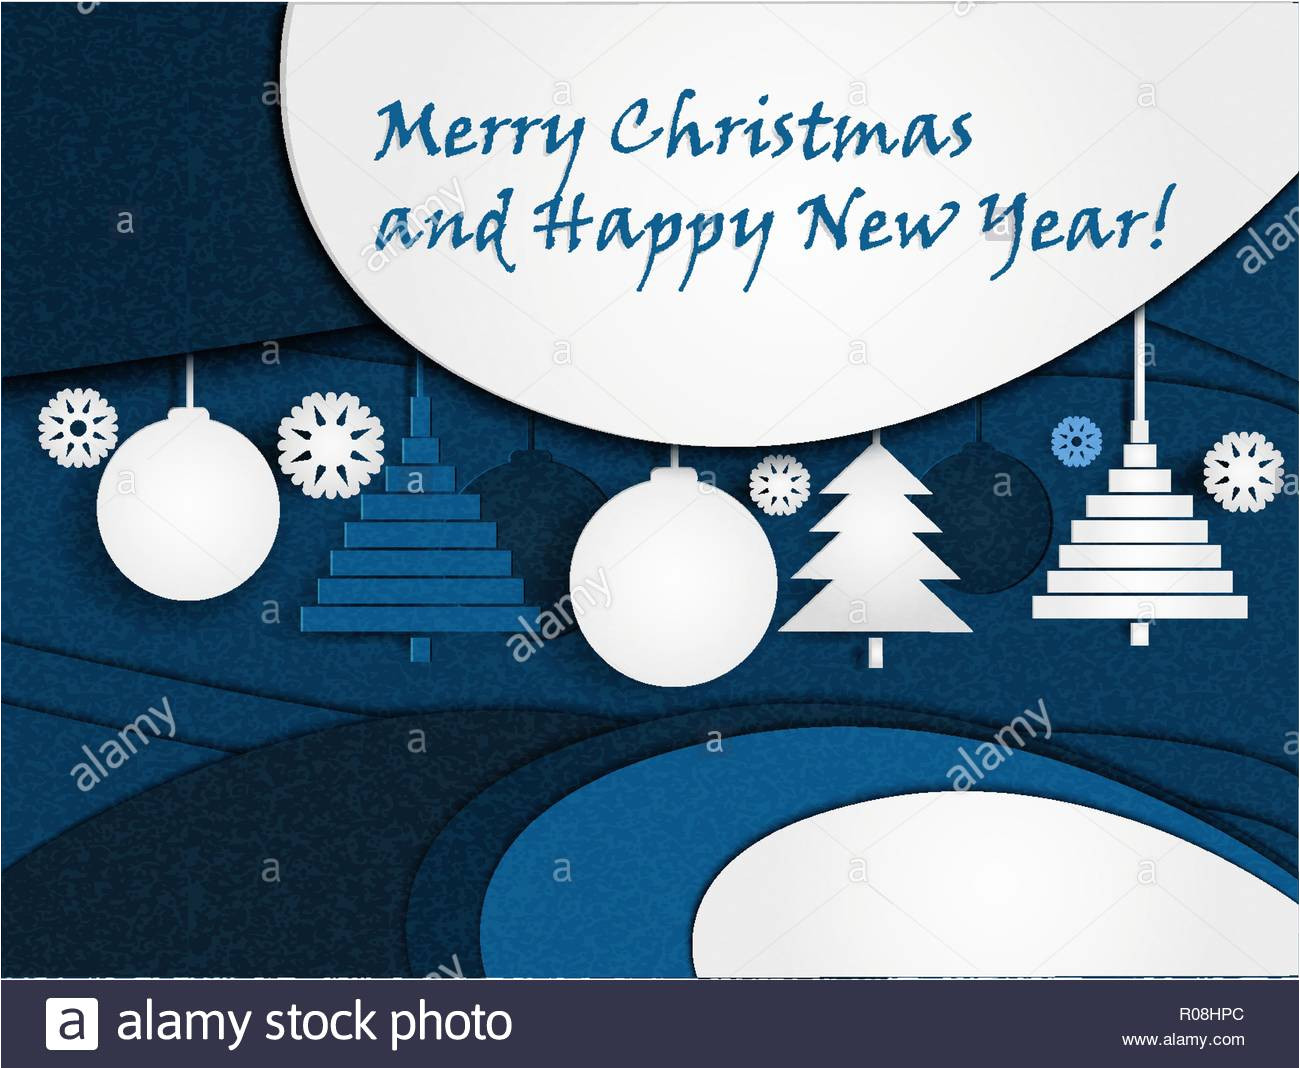 vector illustration in paper cut style greeting card with text merry christmas and happy new year or you can change to another text r08hpc jpg